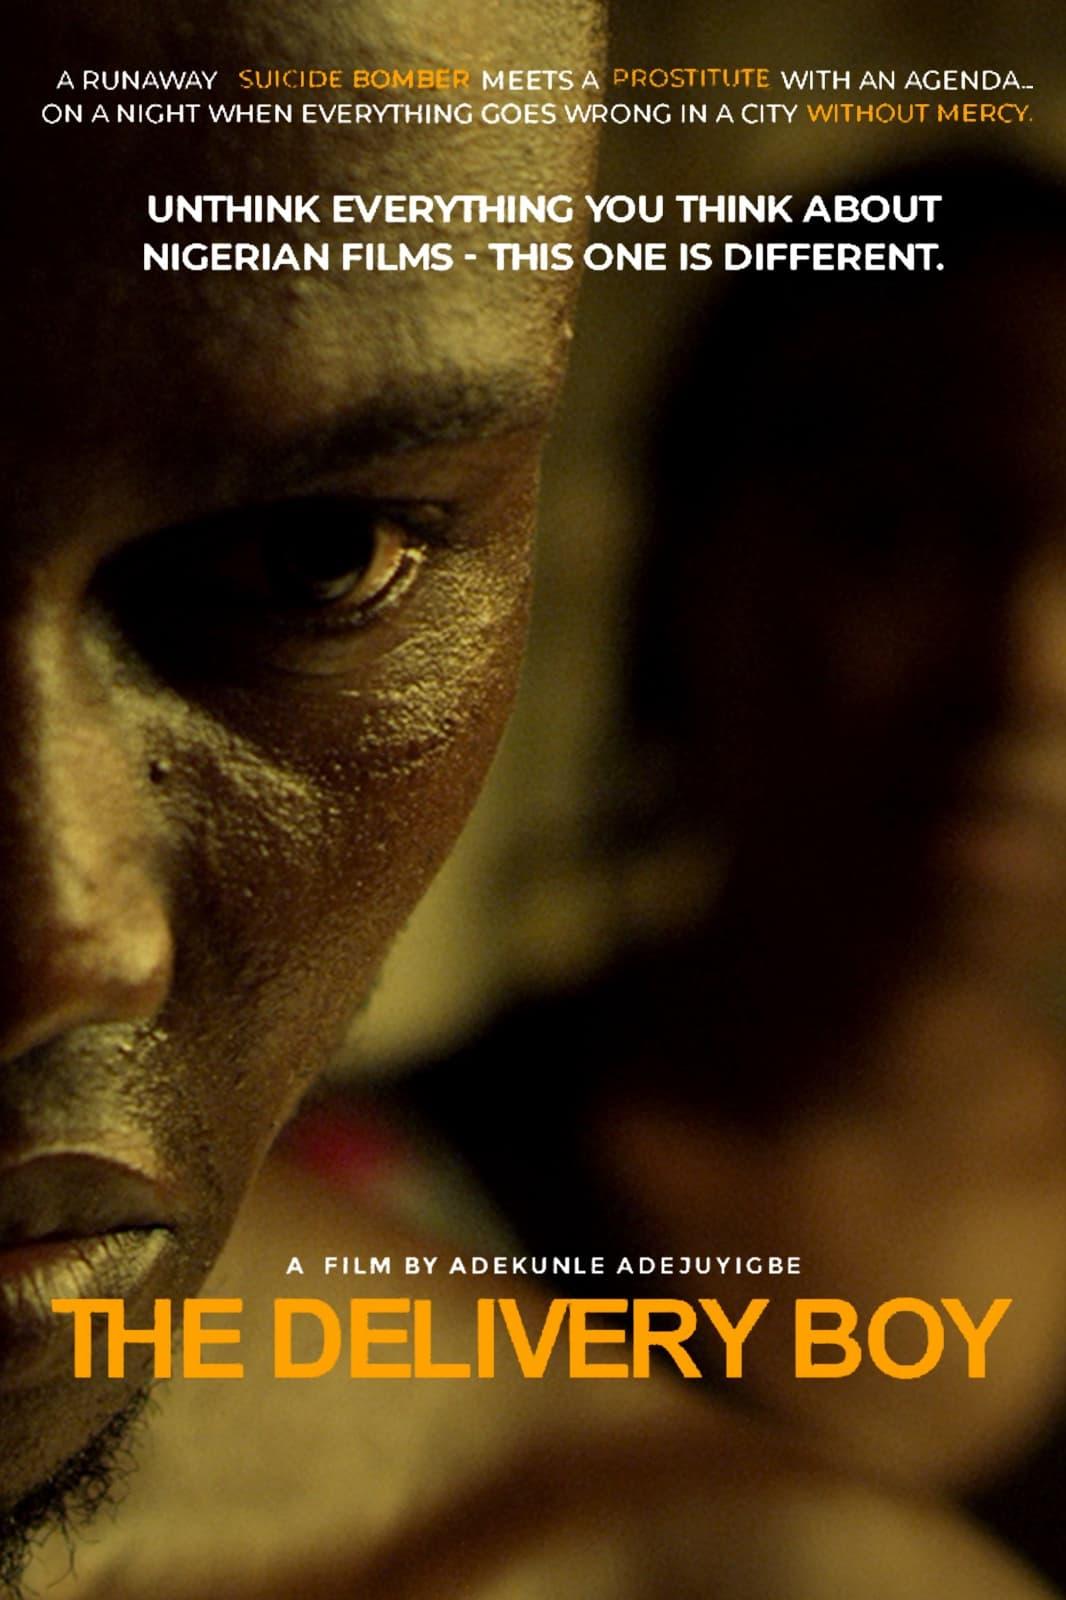 The Delivery Boy poster